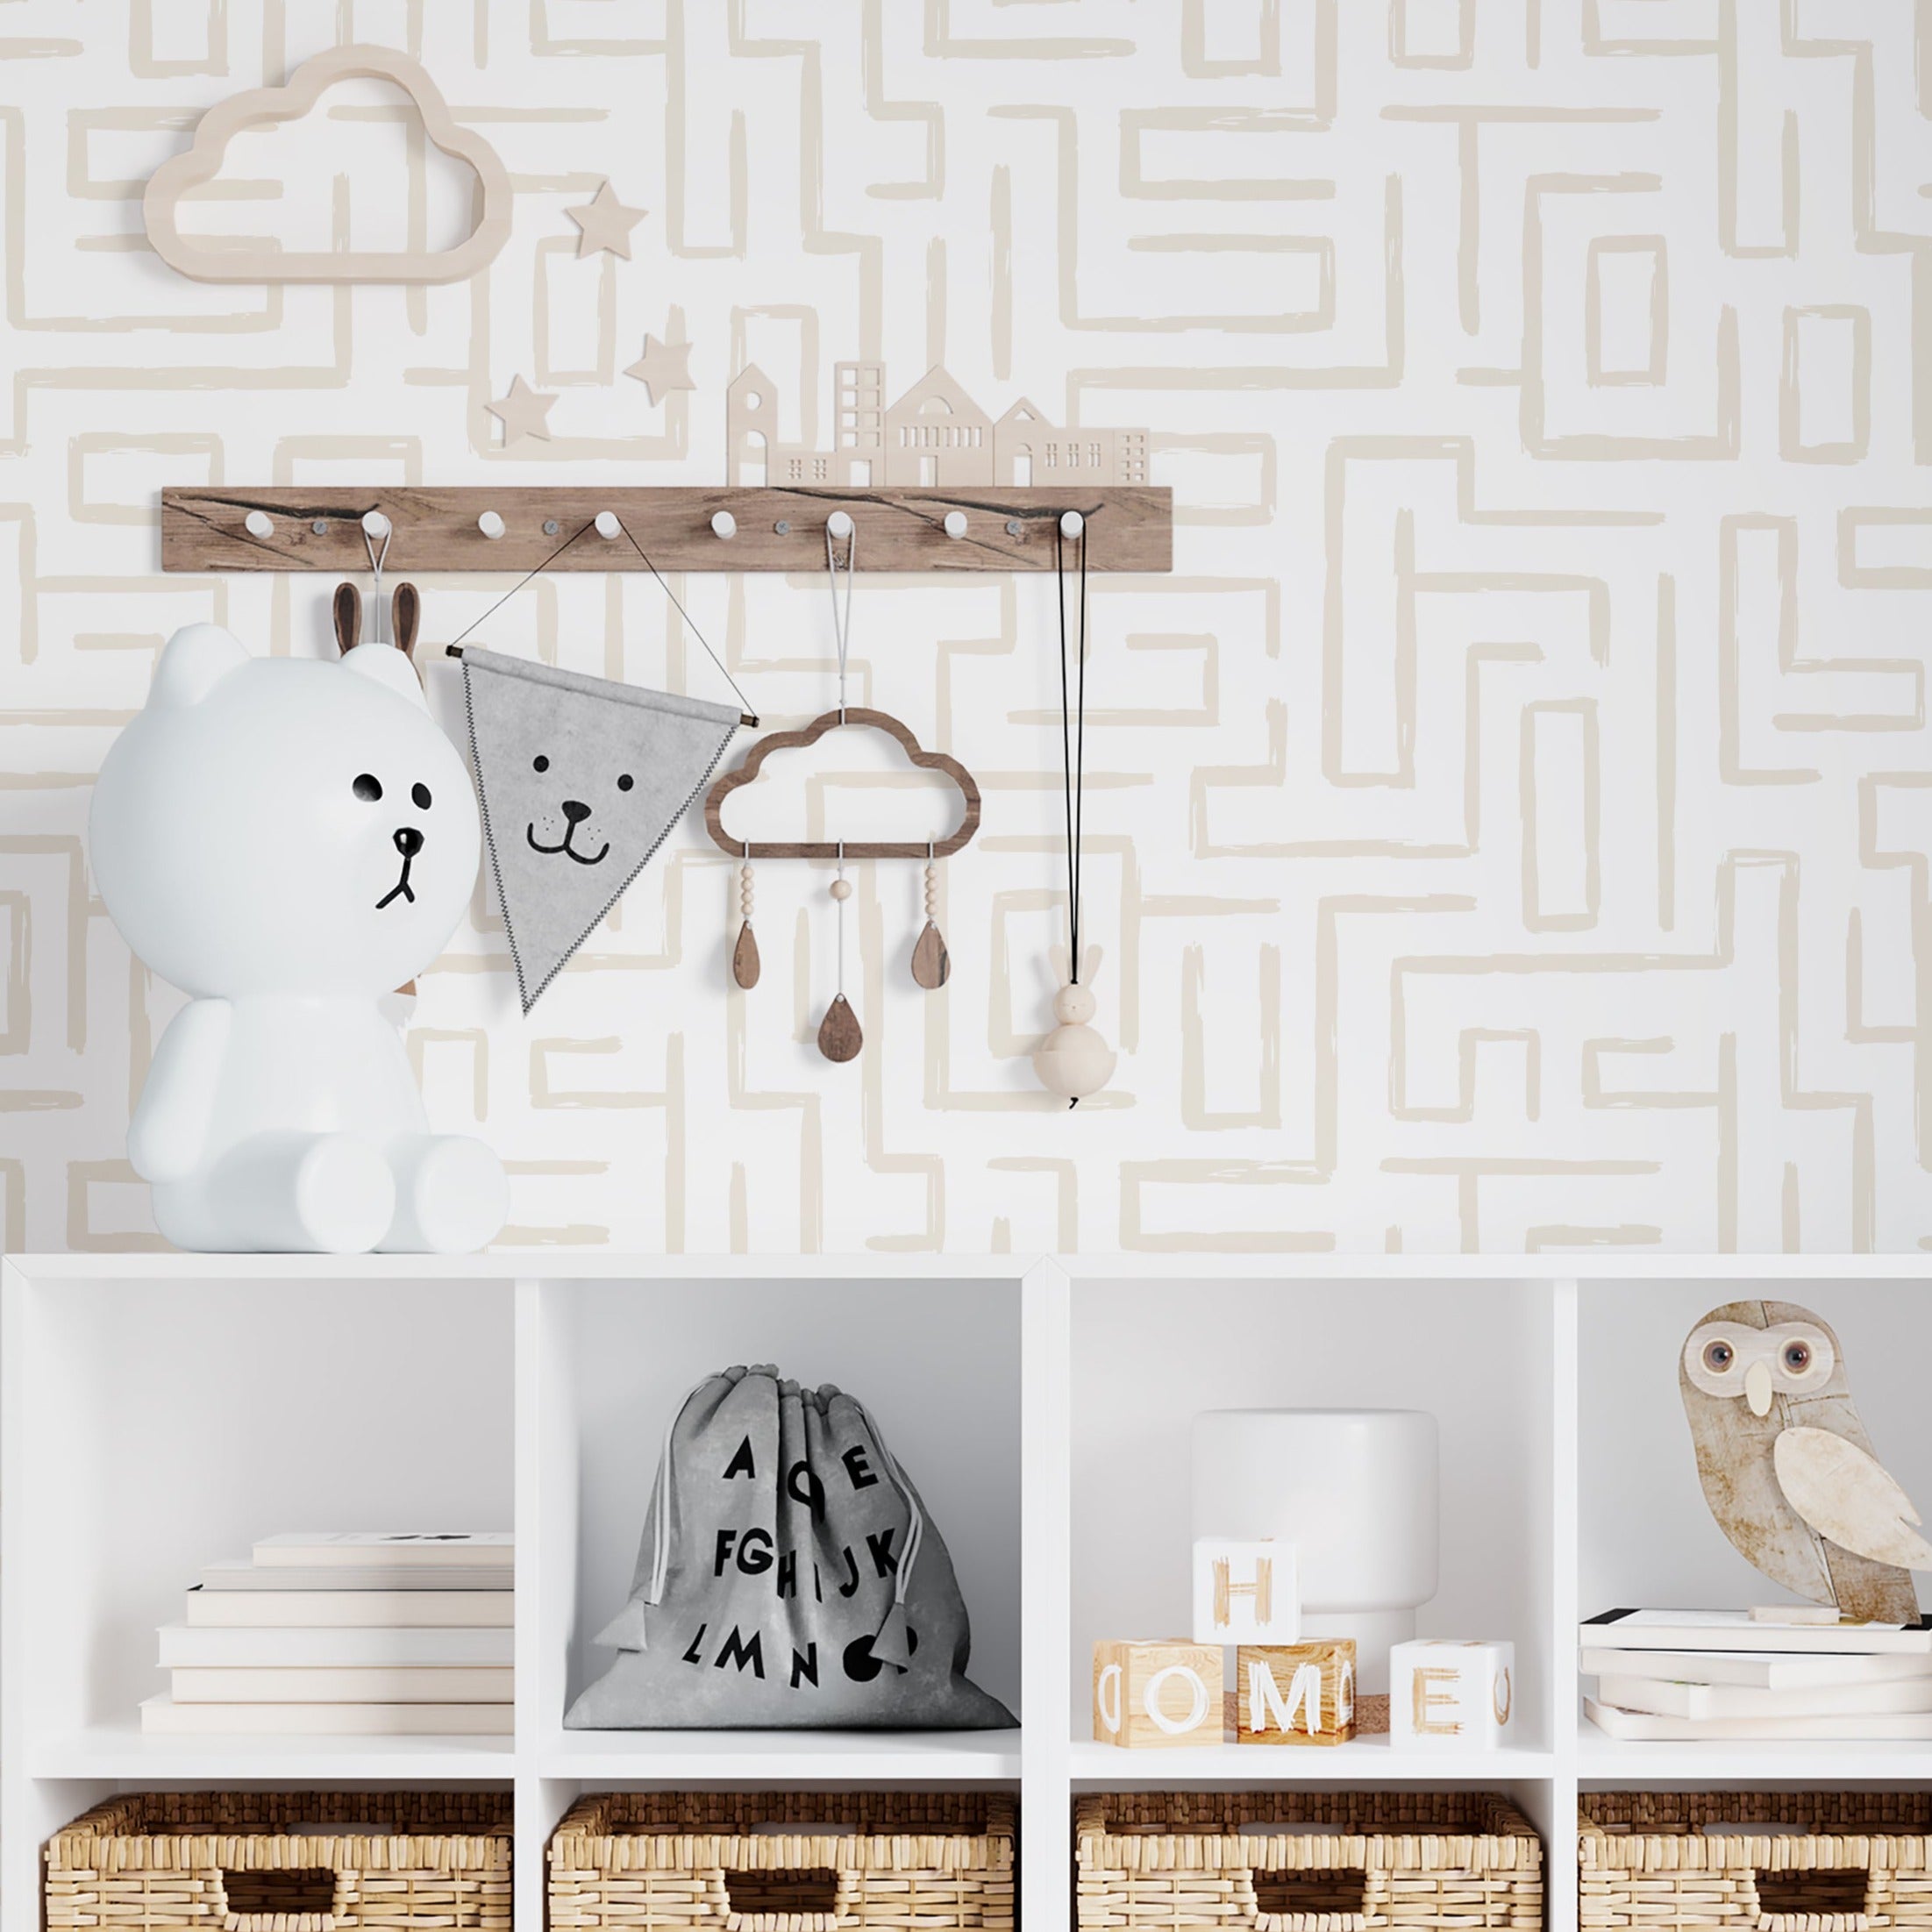 A stylish nursery room wall covered with Organic Wallpaper 19 Ecru, featuring an intricate maze pattern in a gentle ecru shade. The room is accessorized with a children's shelf displaying toys and decorative items, enhancing a playful yet sophisticated space.